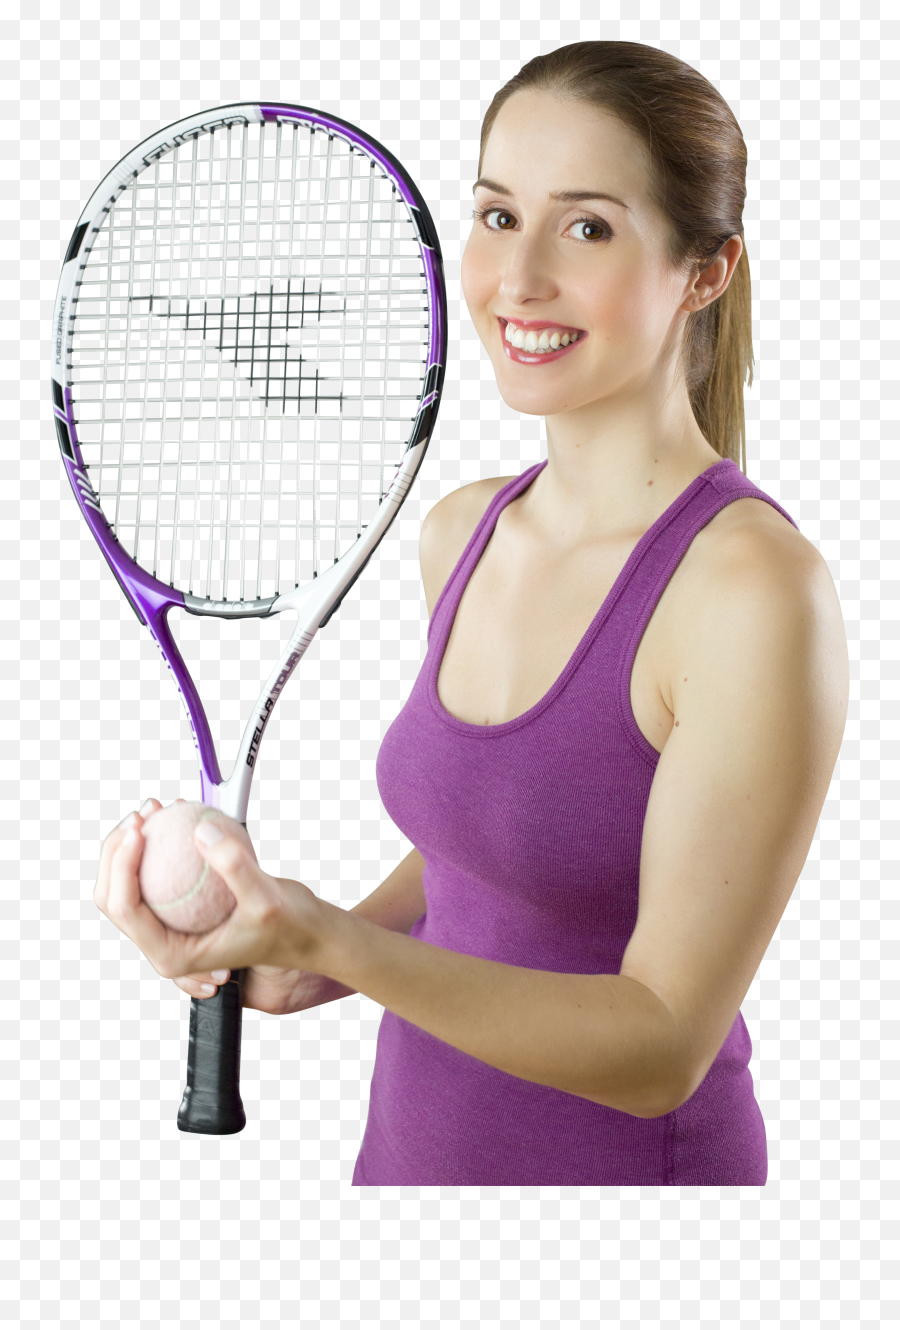 Download Female Tennis Player Png Image For Free Racquet